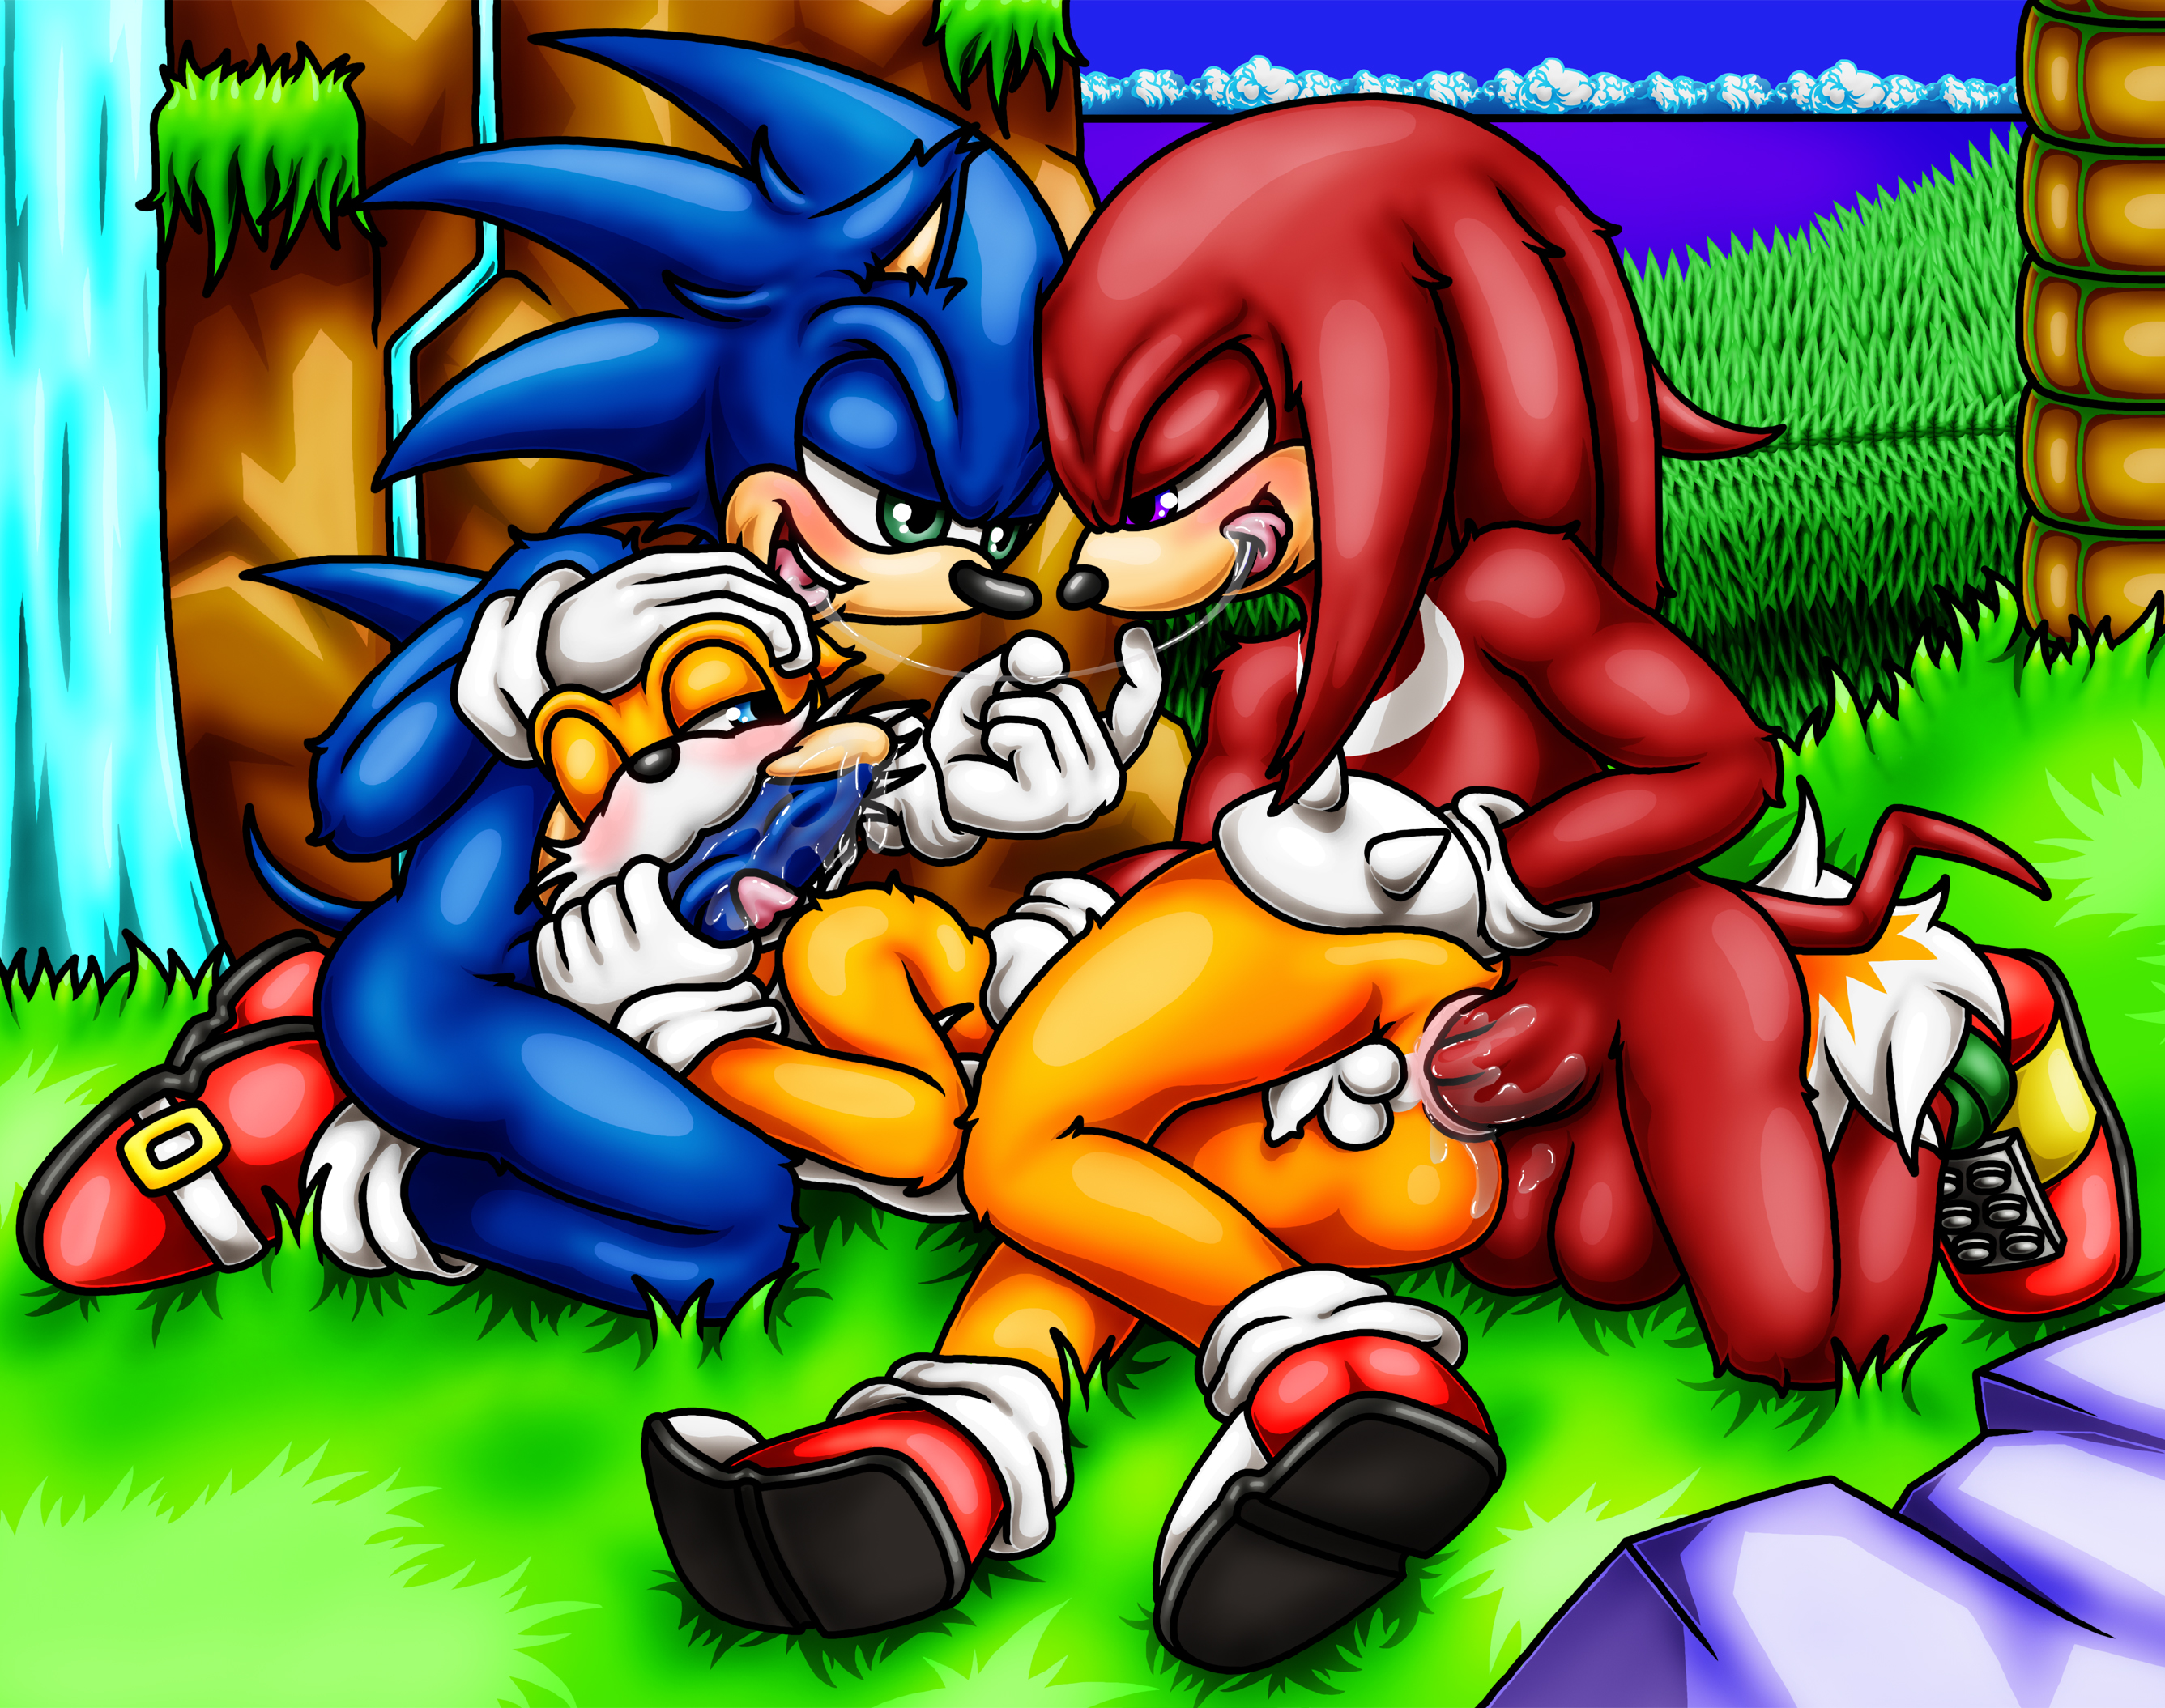 Yaoi pinup knuckles the echidna+sonic the hedgehog+tails